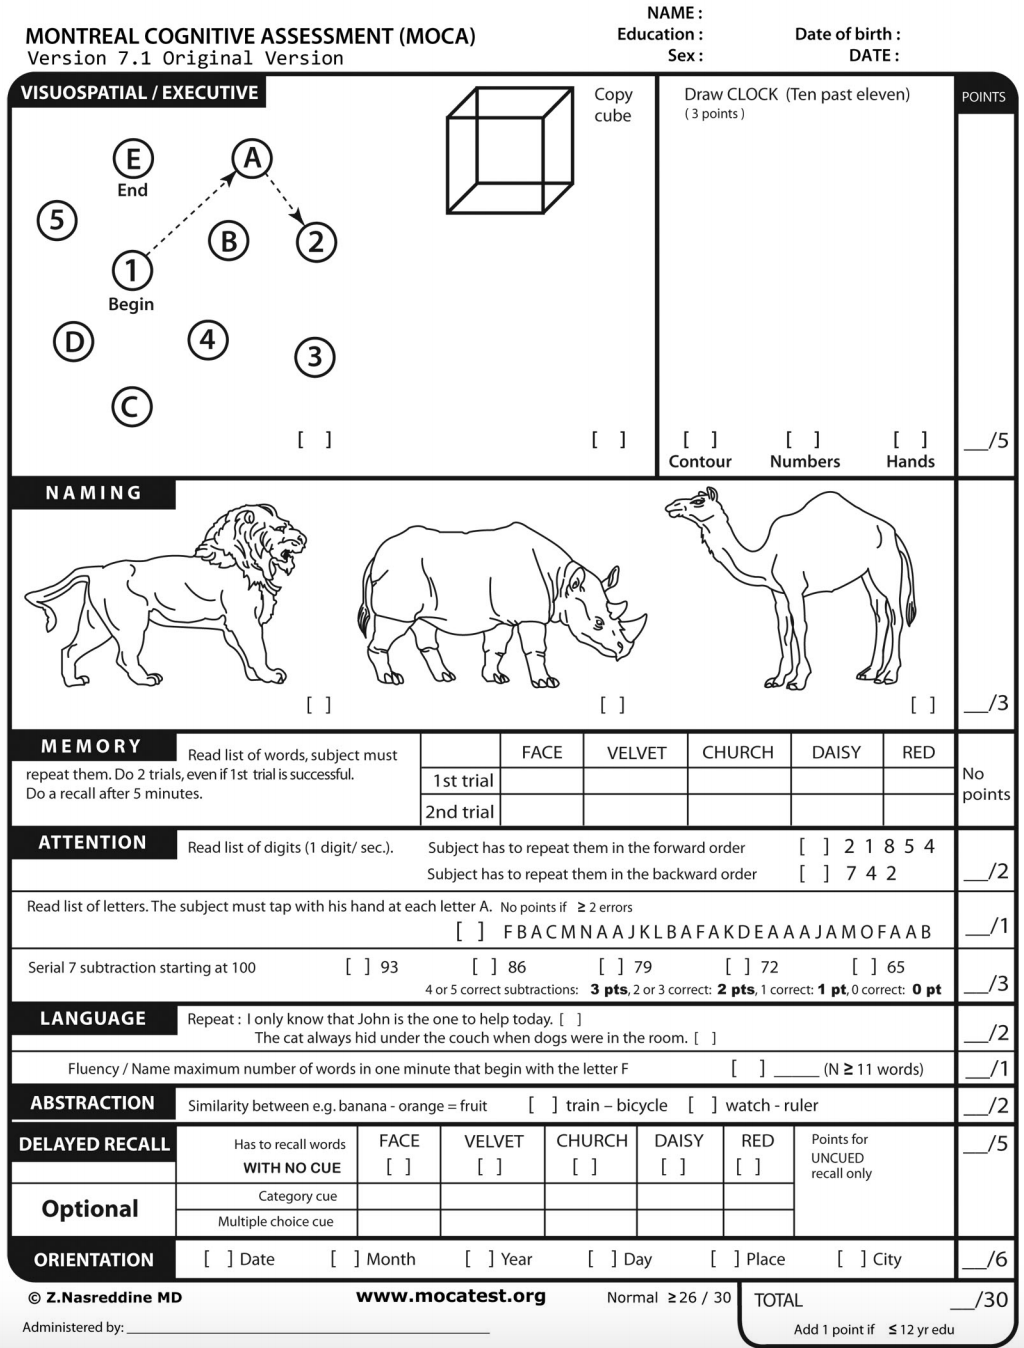 what is montreal cognitive assessment moca